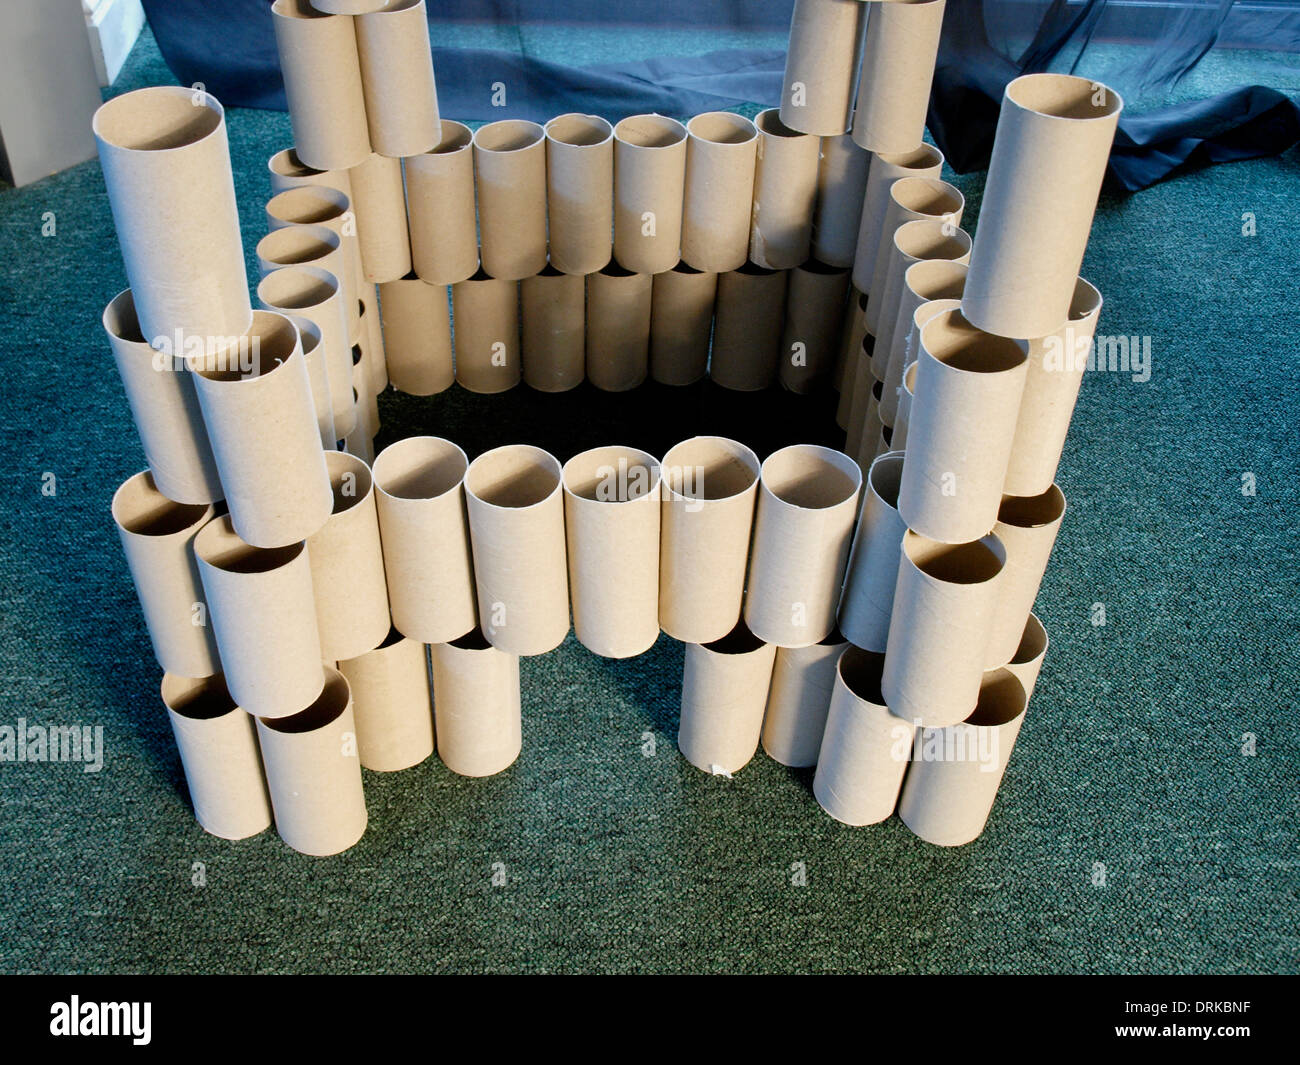 Child's fort made from inner tubes from toilet rolls Stock Photo